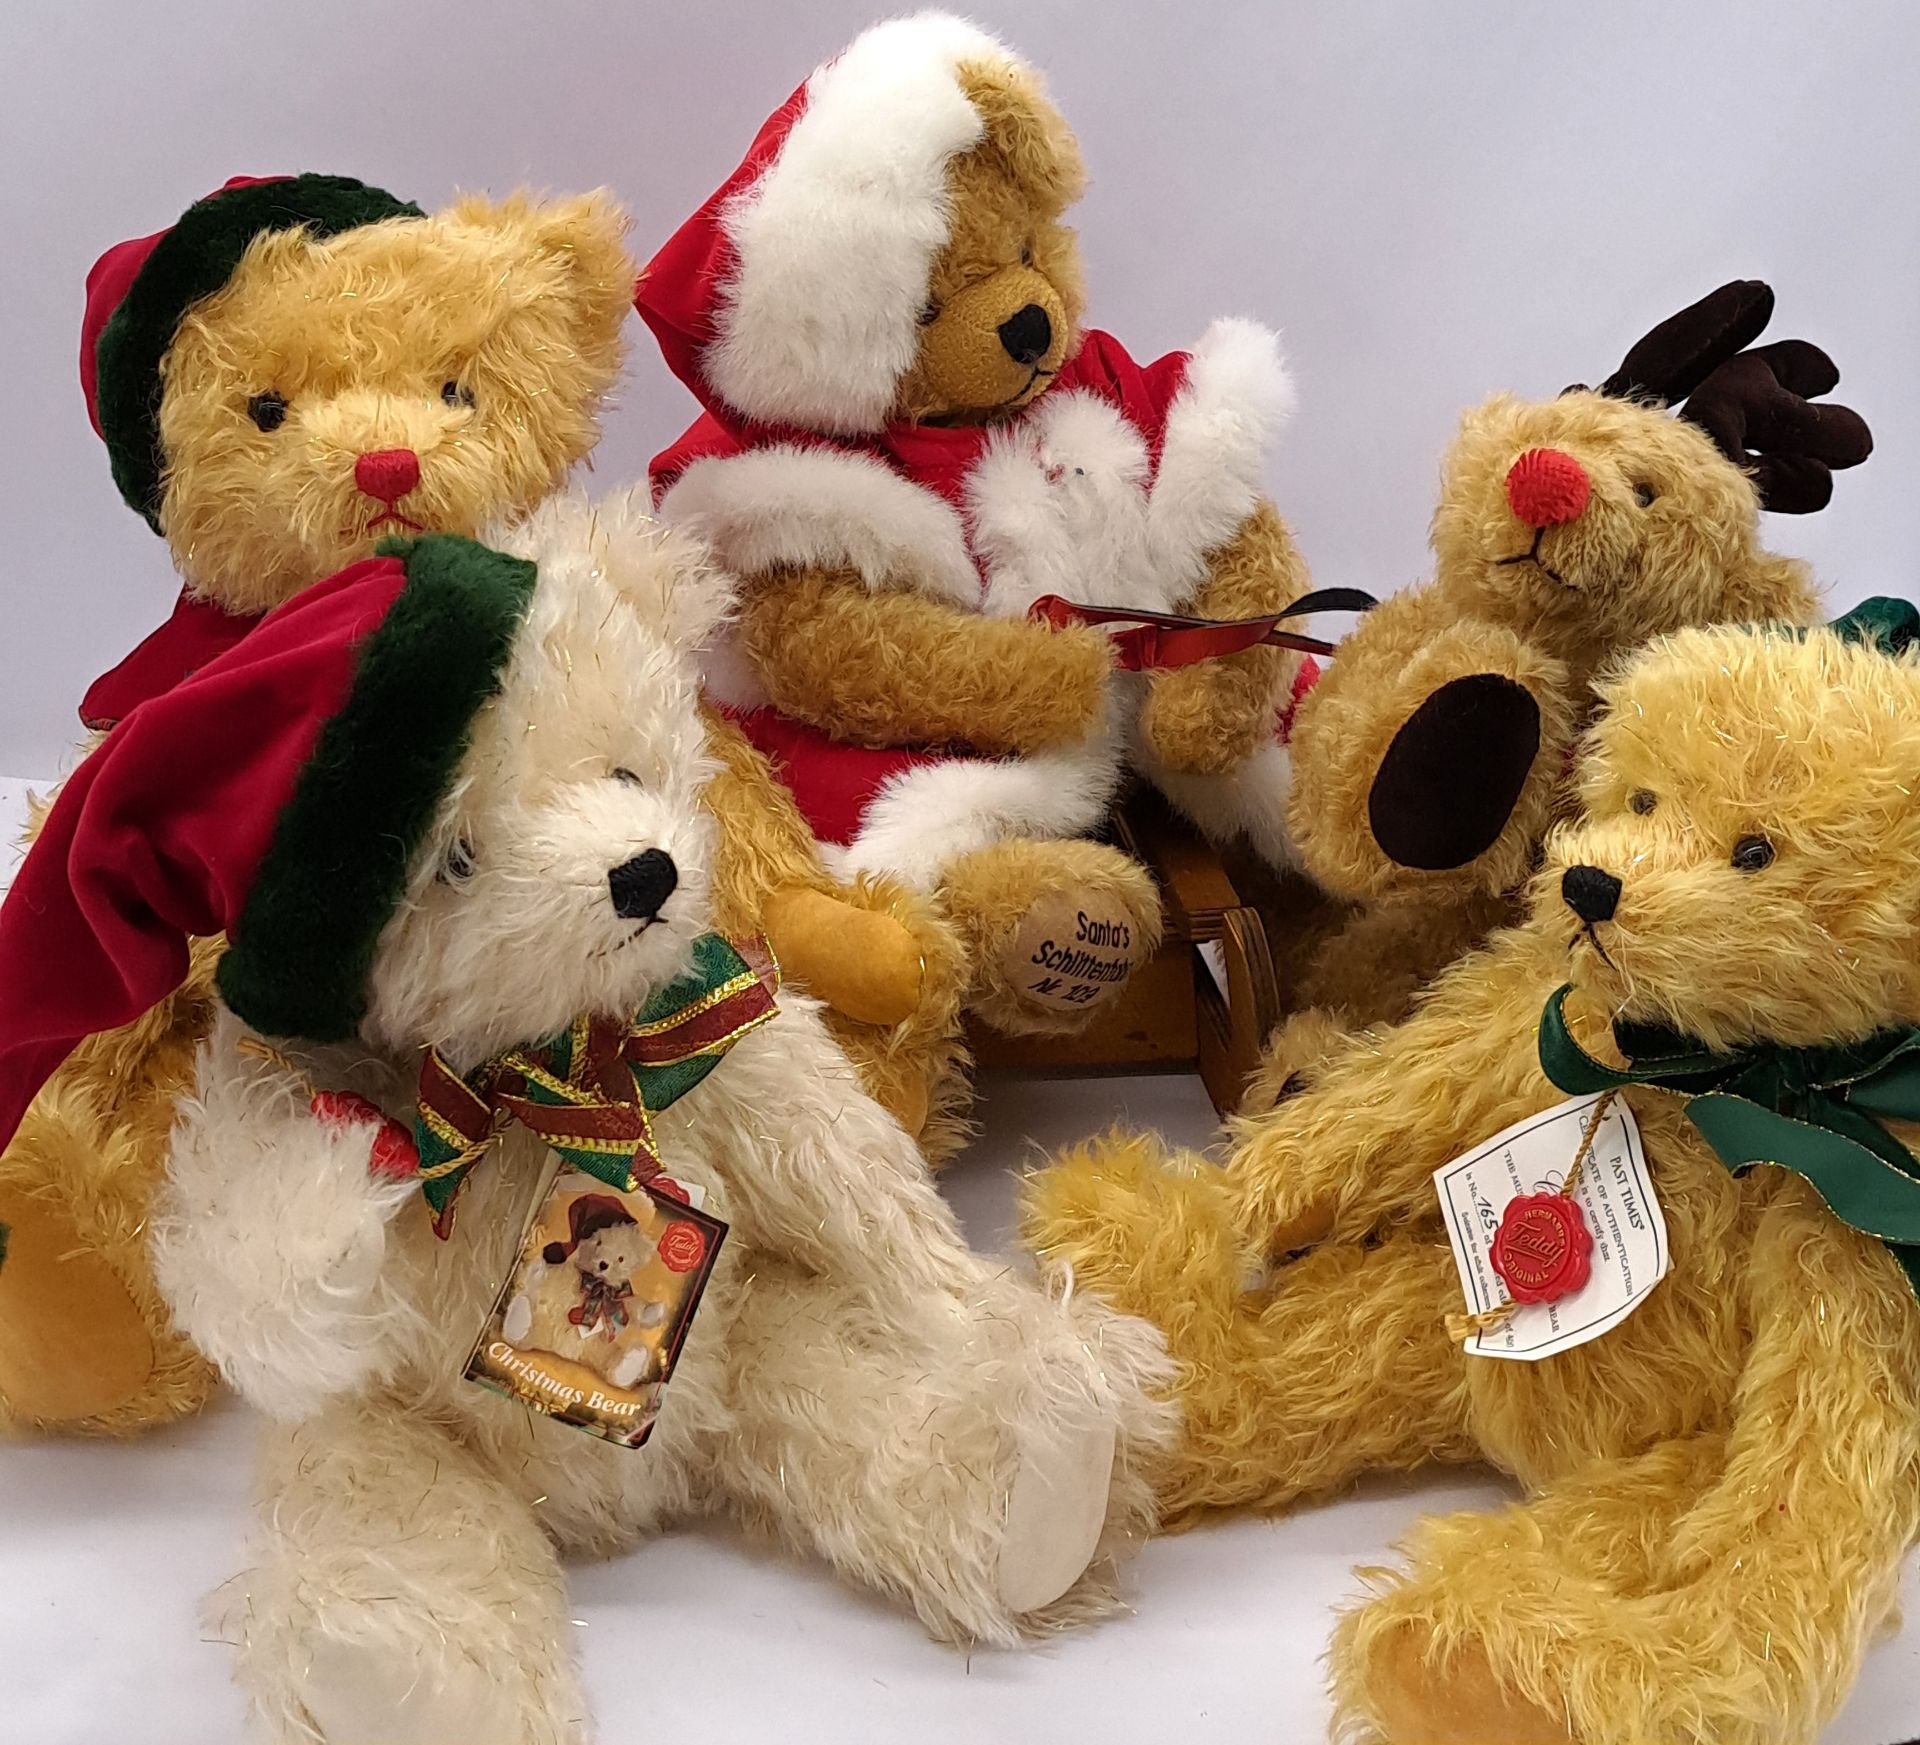 Teddy-Hermann and Herman Spielwaren: collection of Christmas-themed teddy bears